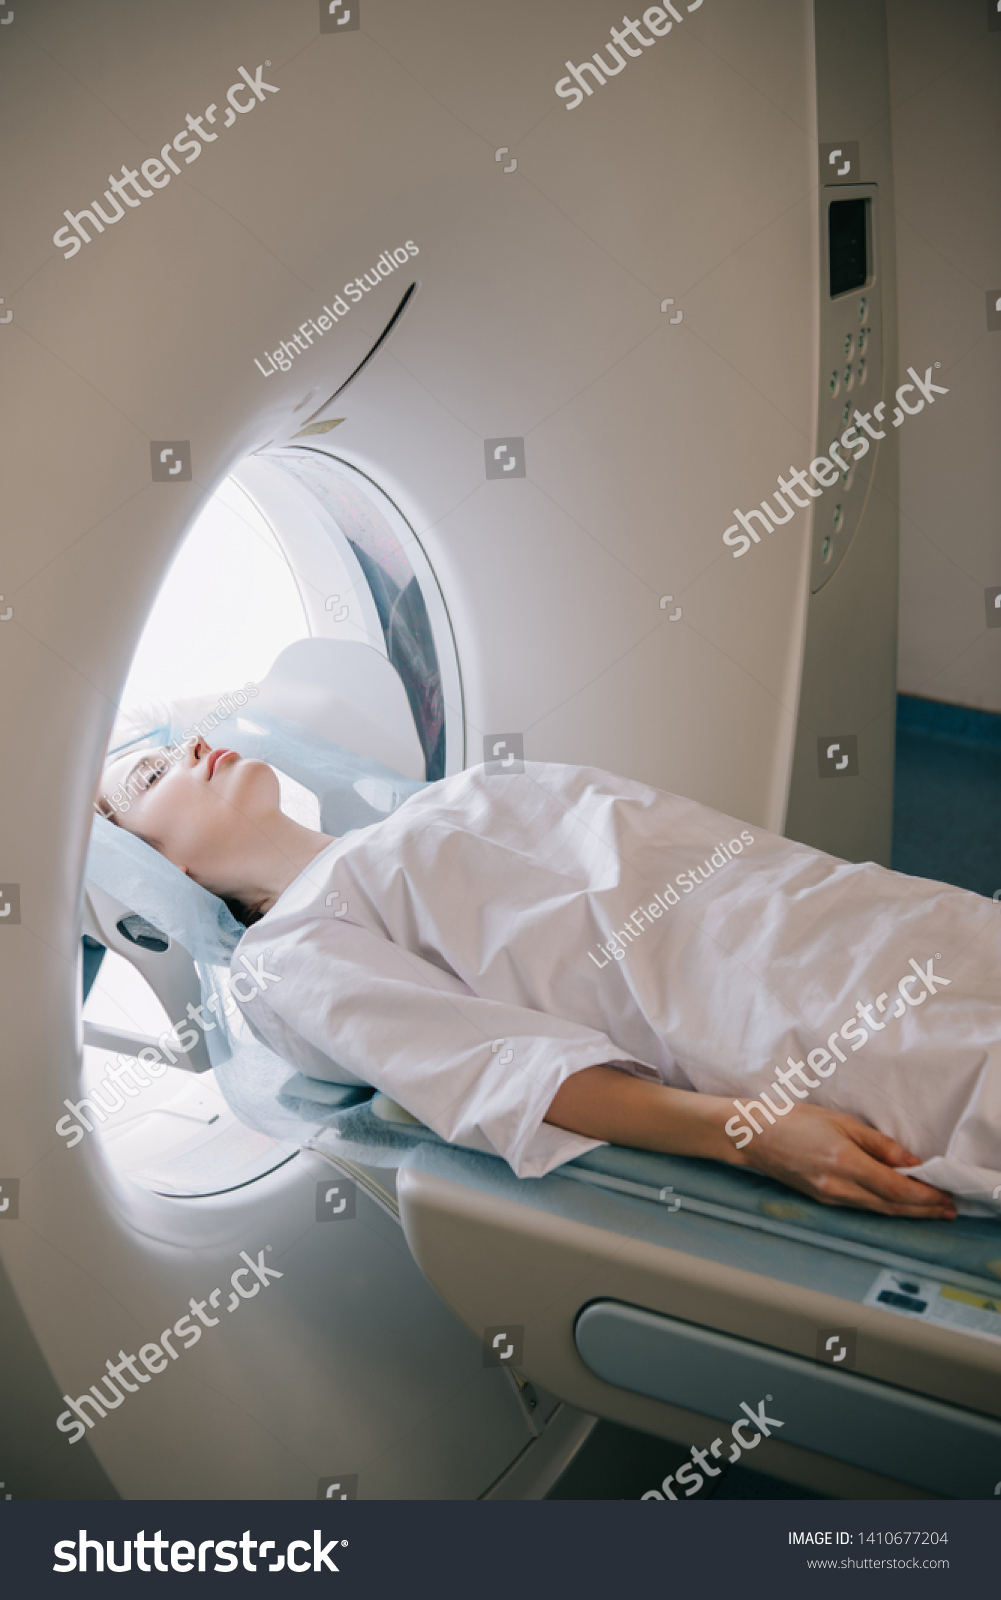 woman with closed eyes lying on computed tomography scanner table during radiology test #1410677204